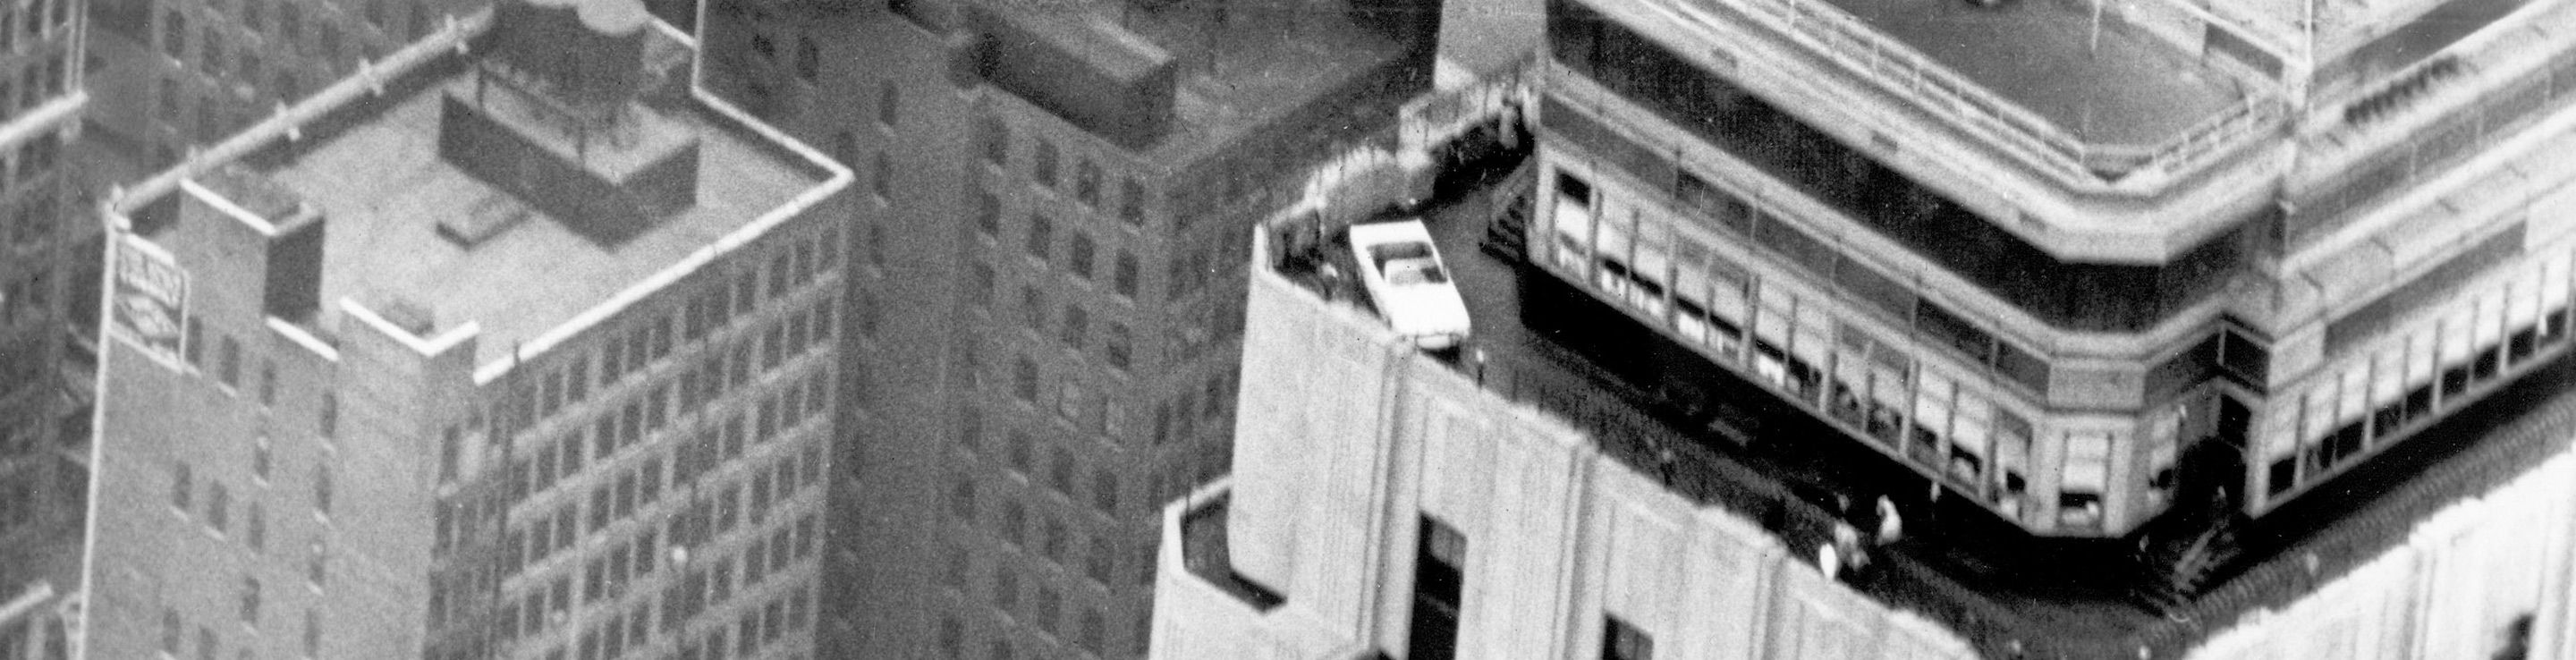 Ford Mustang on Empire State building